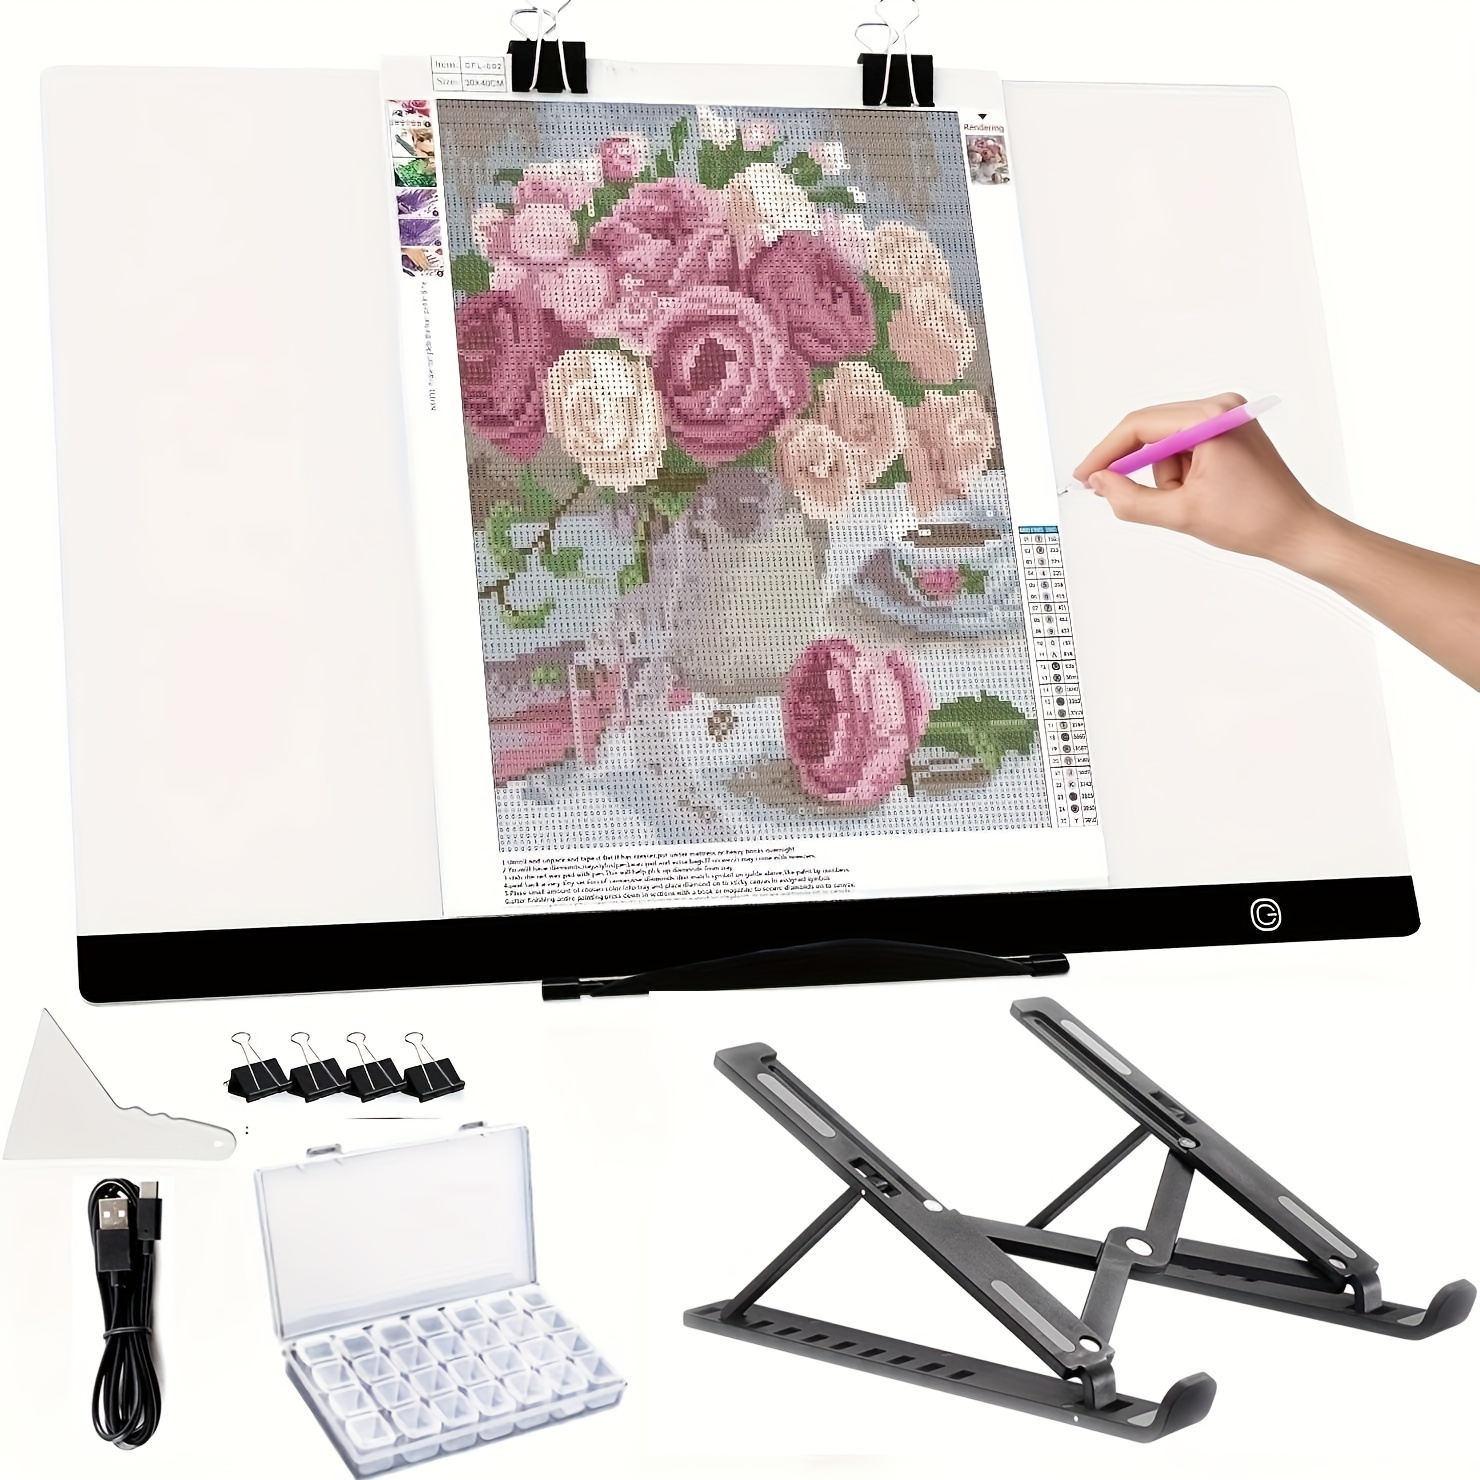 NEW A4 Drawing Tablet Board USB Powered Dimmable LED Light Pad For Drawing,Tracing,Diamond  Painting Accessories Pen Stand Tray